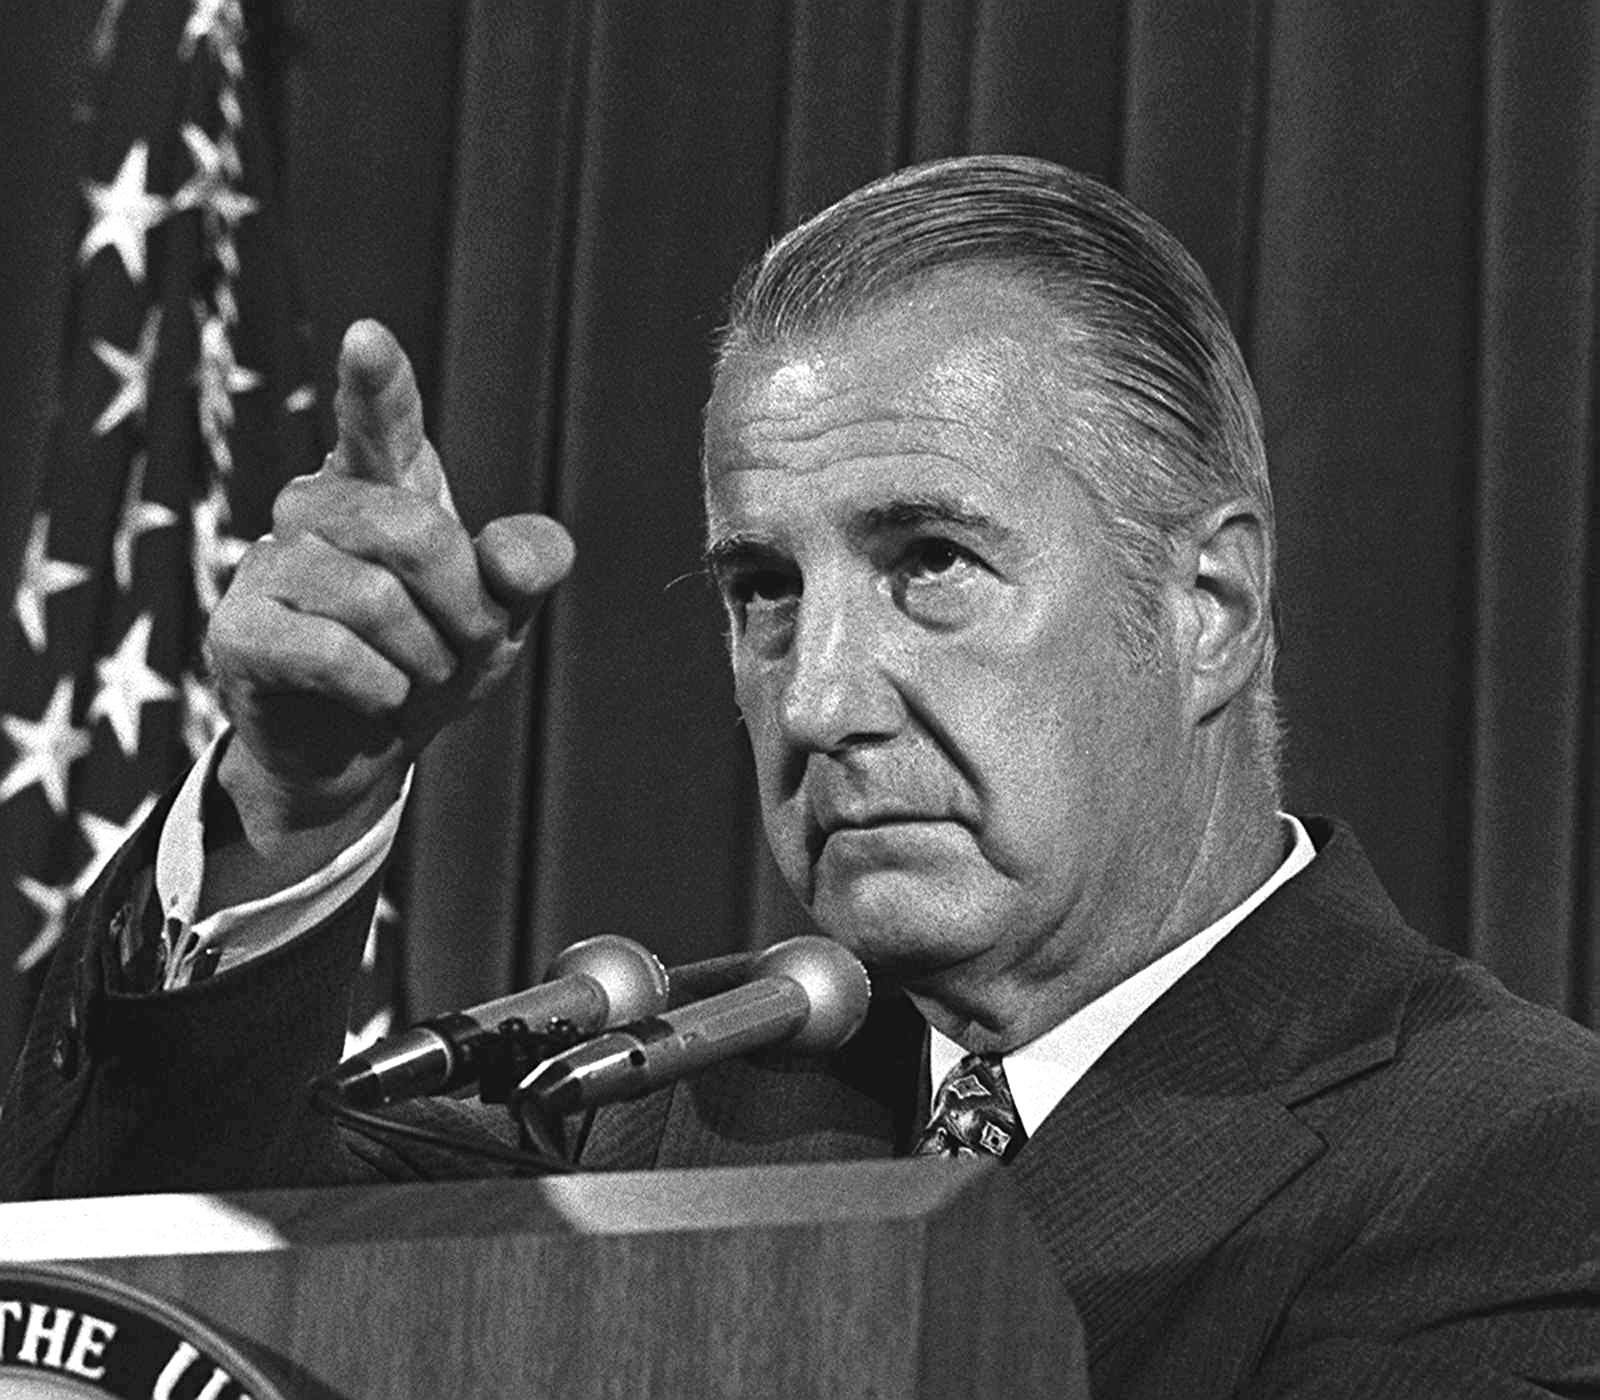 Spiro Agnew’s Ghost: A Haunting Political Legacy